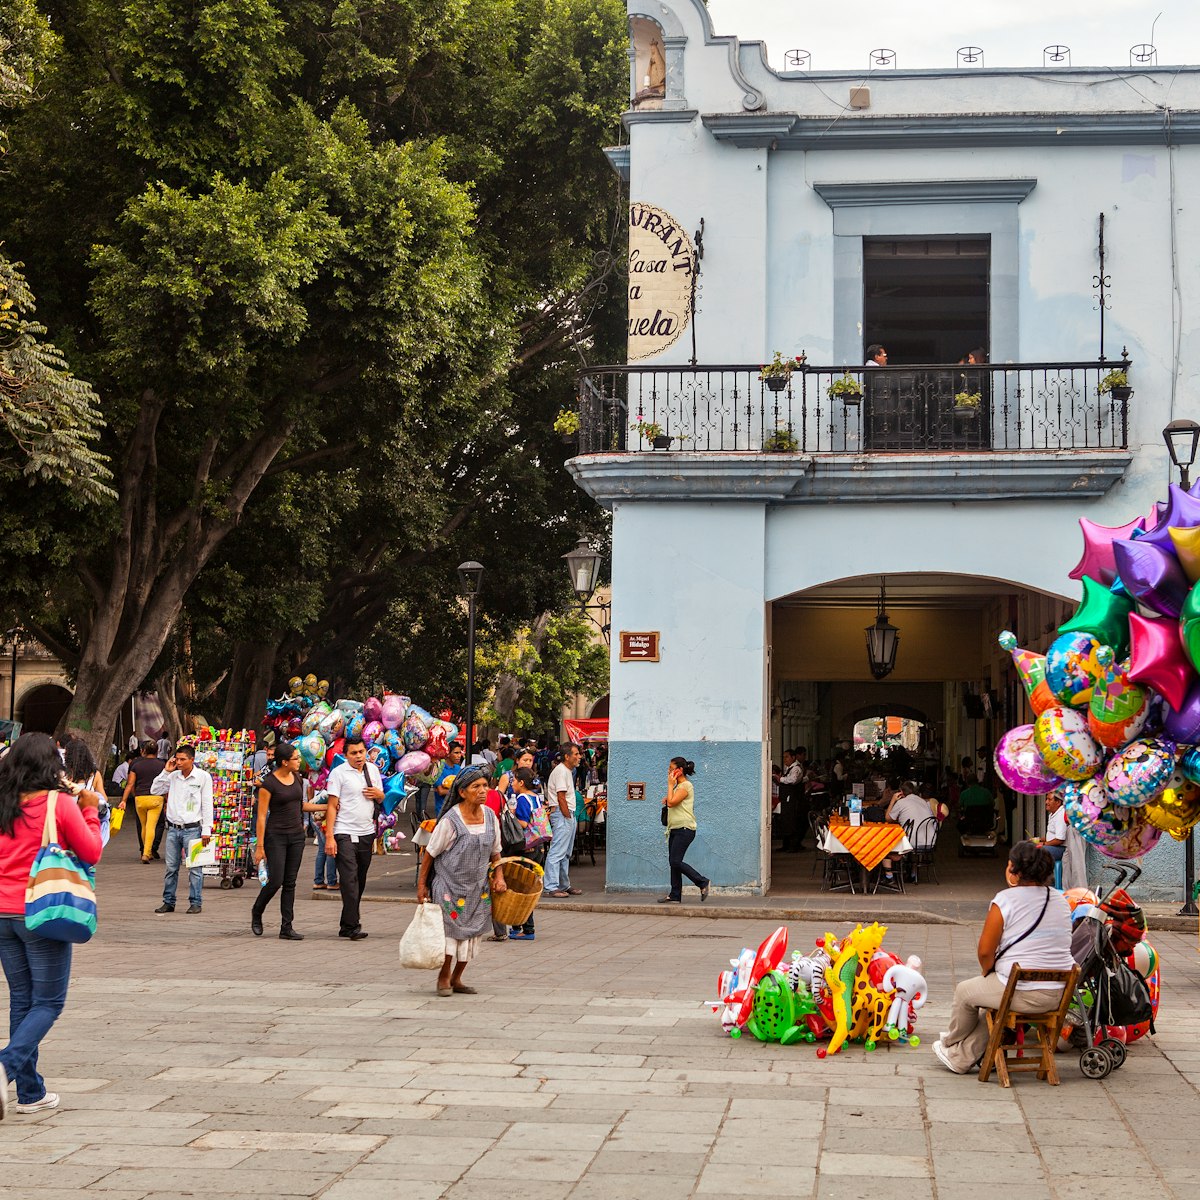 People in the Zocalo (Town Square) in Oaxaca.